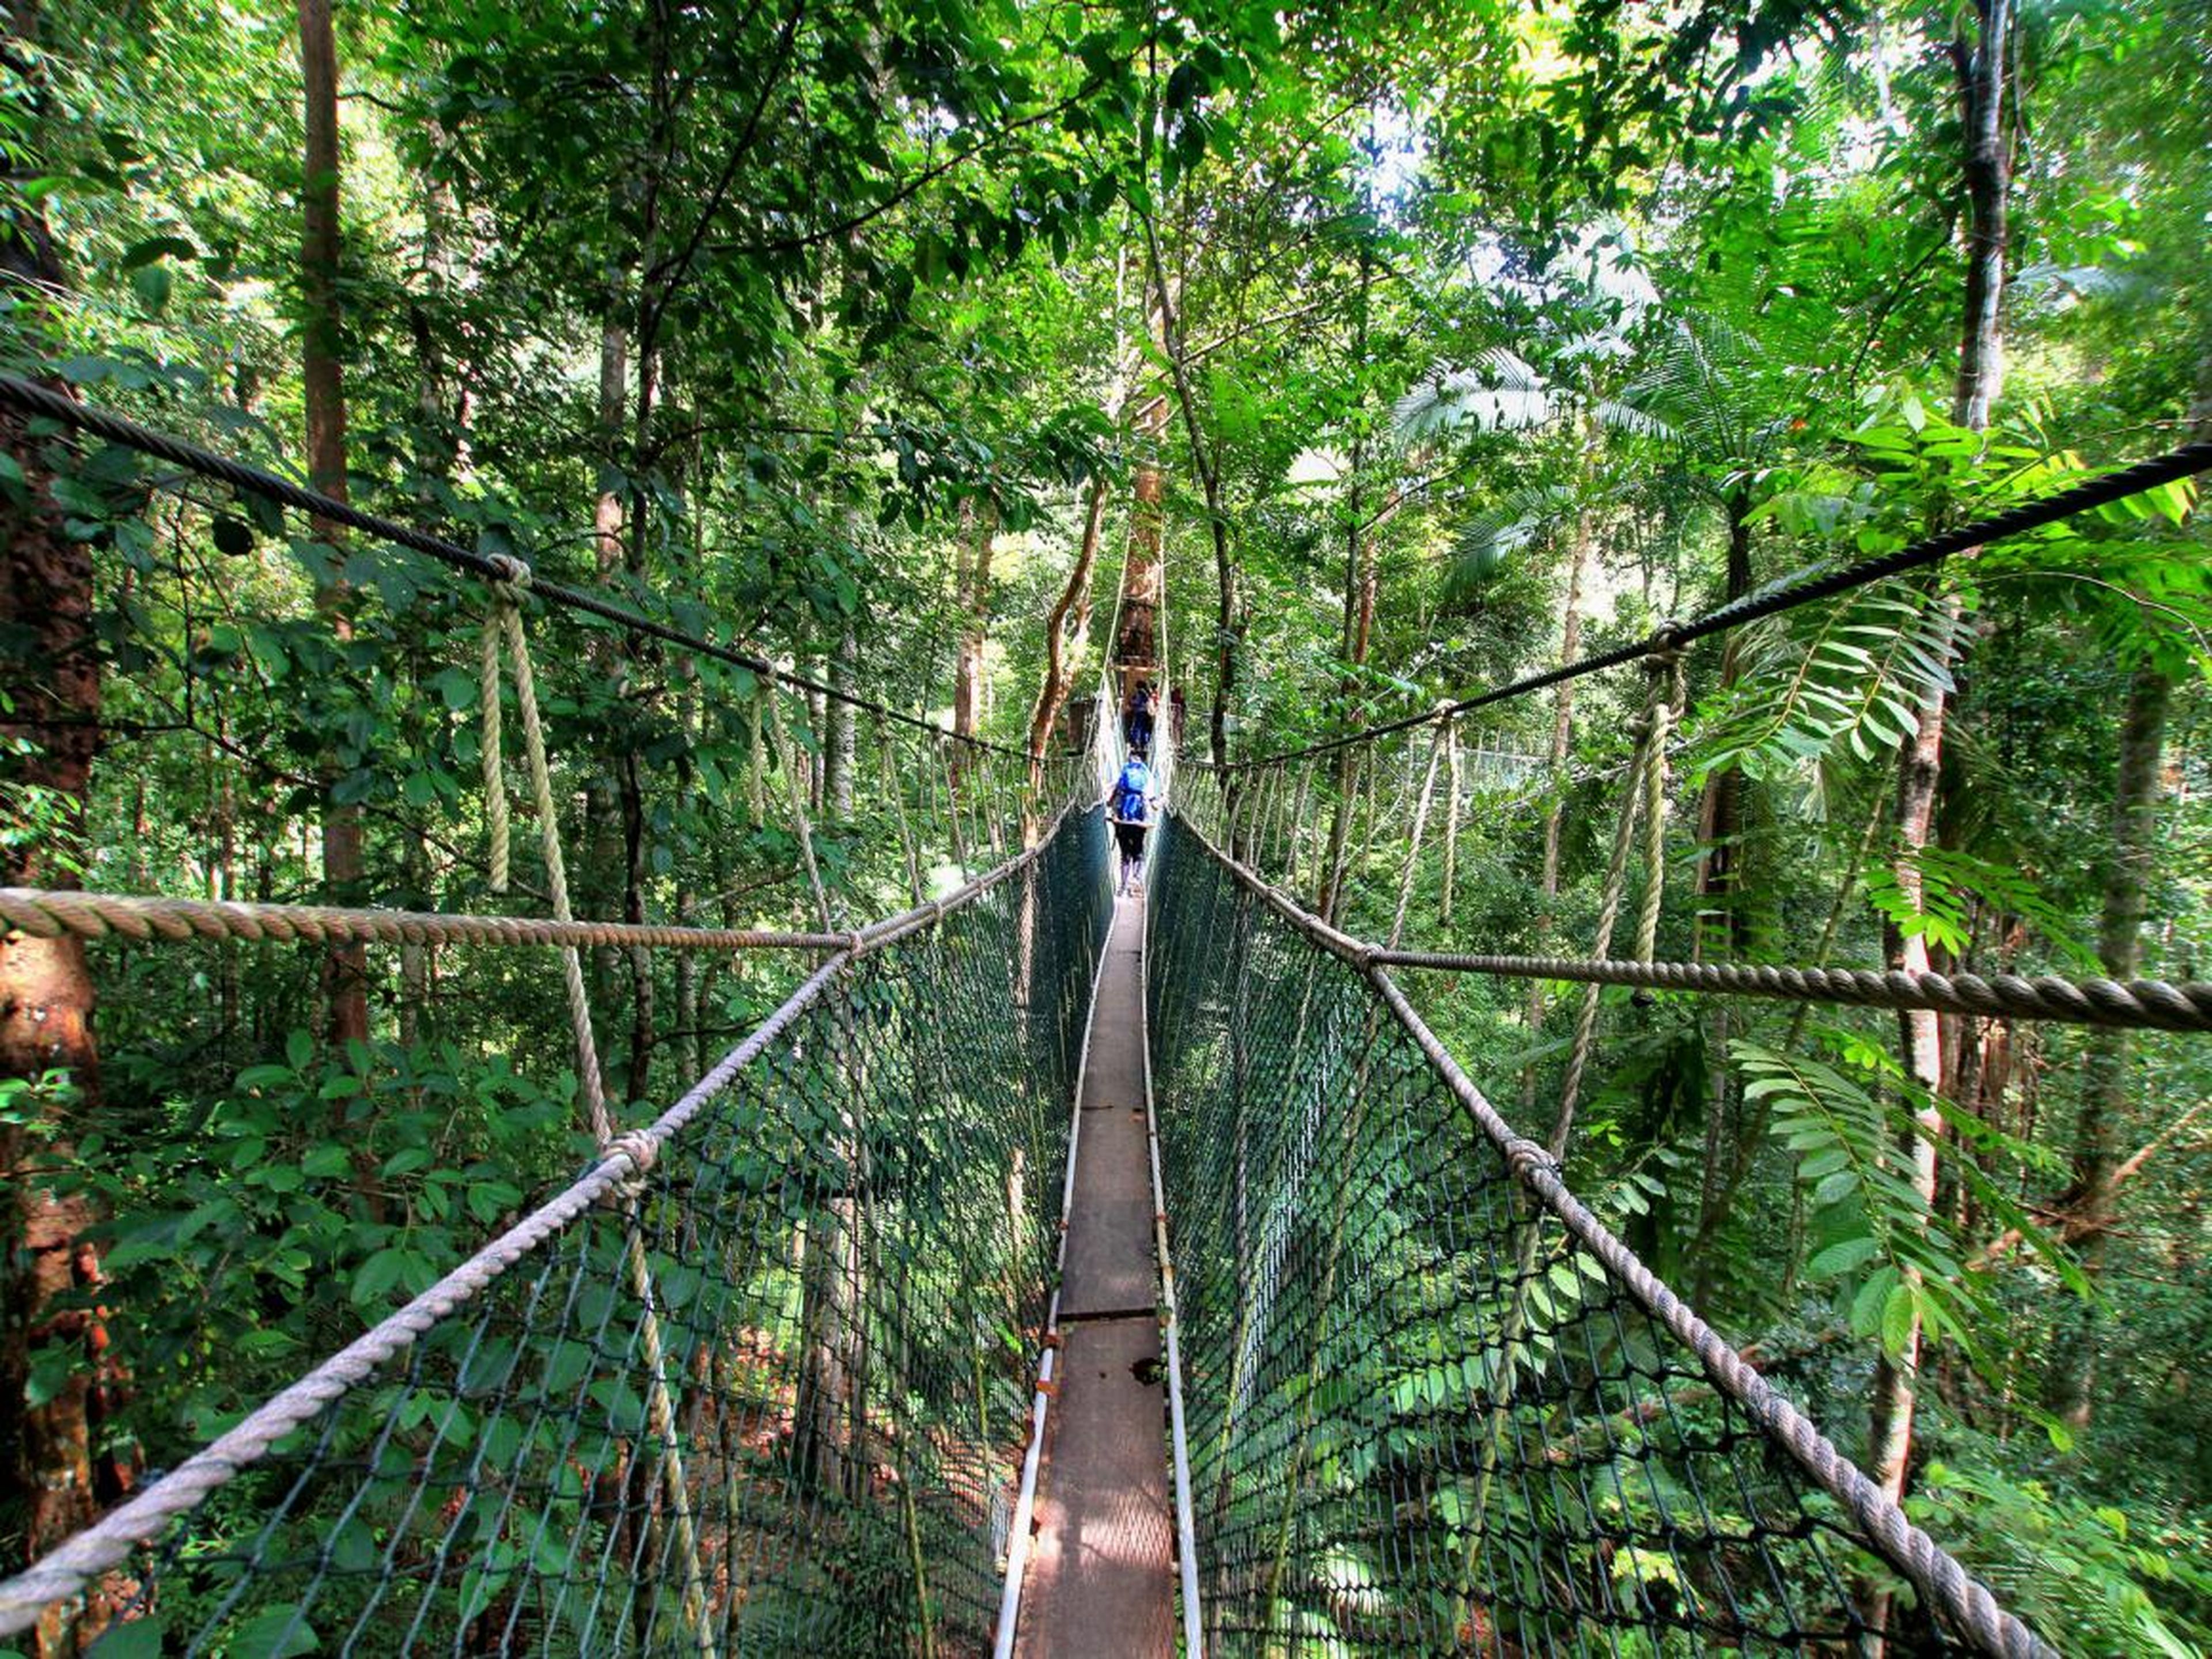 The canopy walkway at Taman Negara, one of the oldest rainforests in the world.